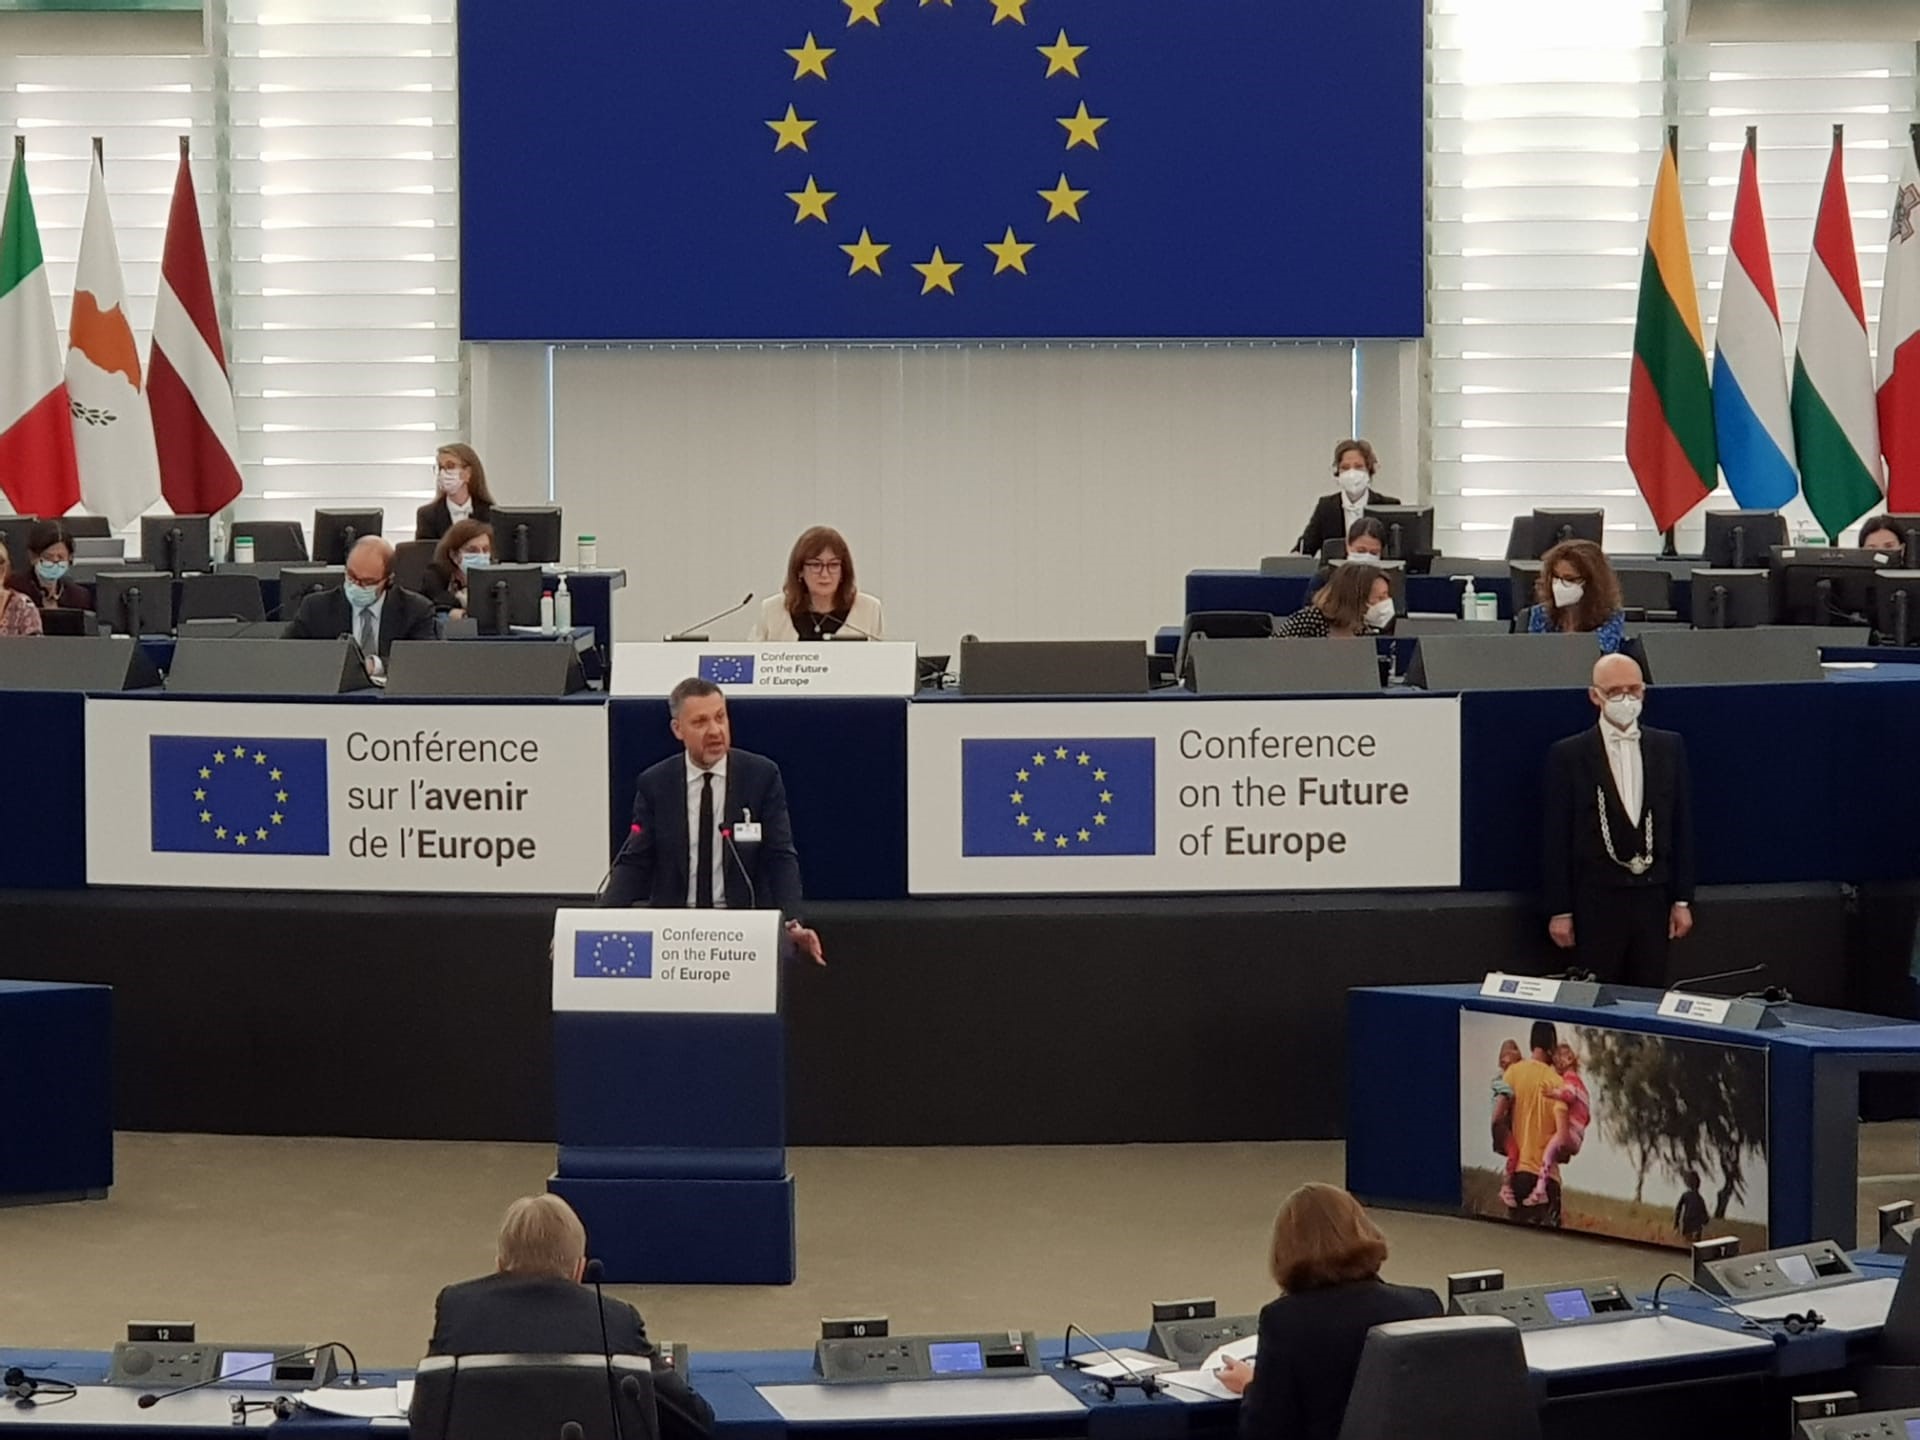 Luca Visentini speaking at Conference on Future of Europe, June 2021